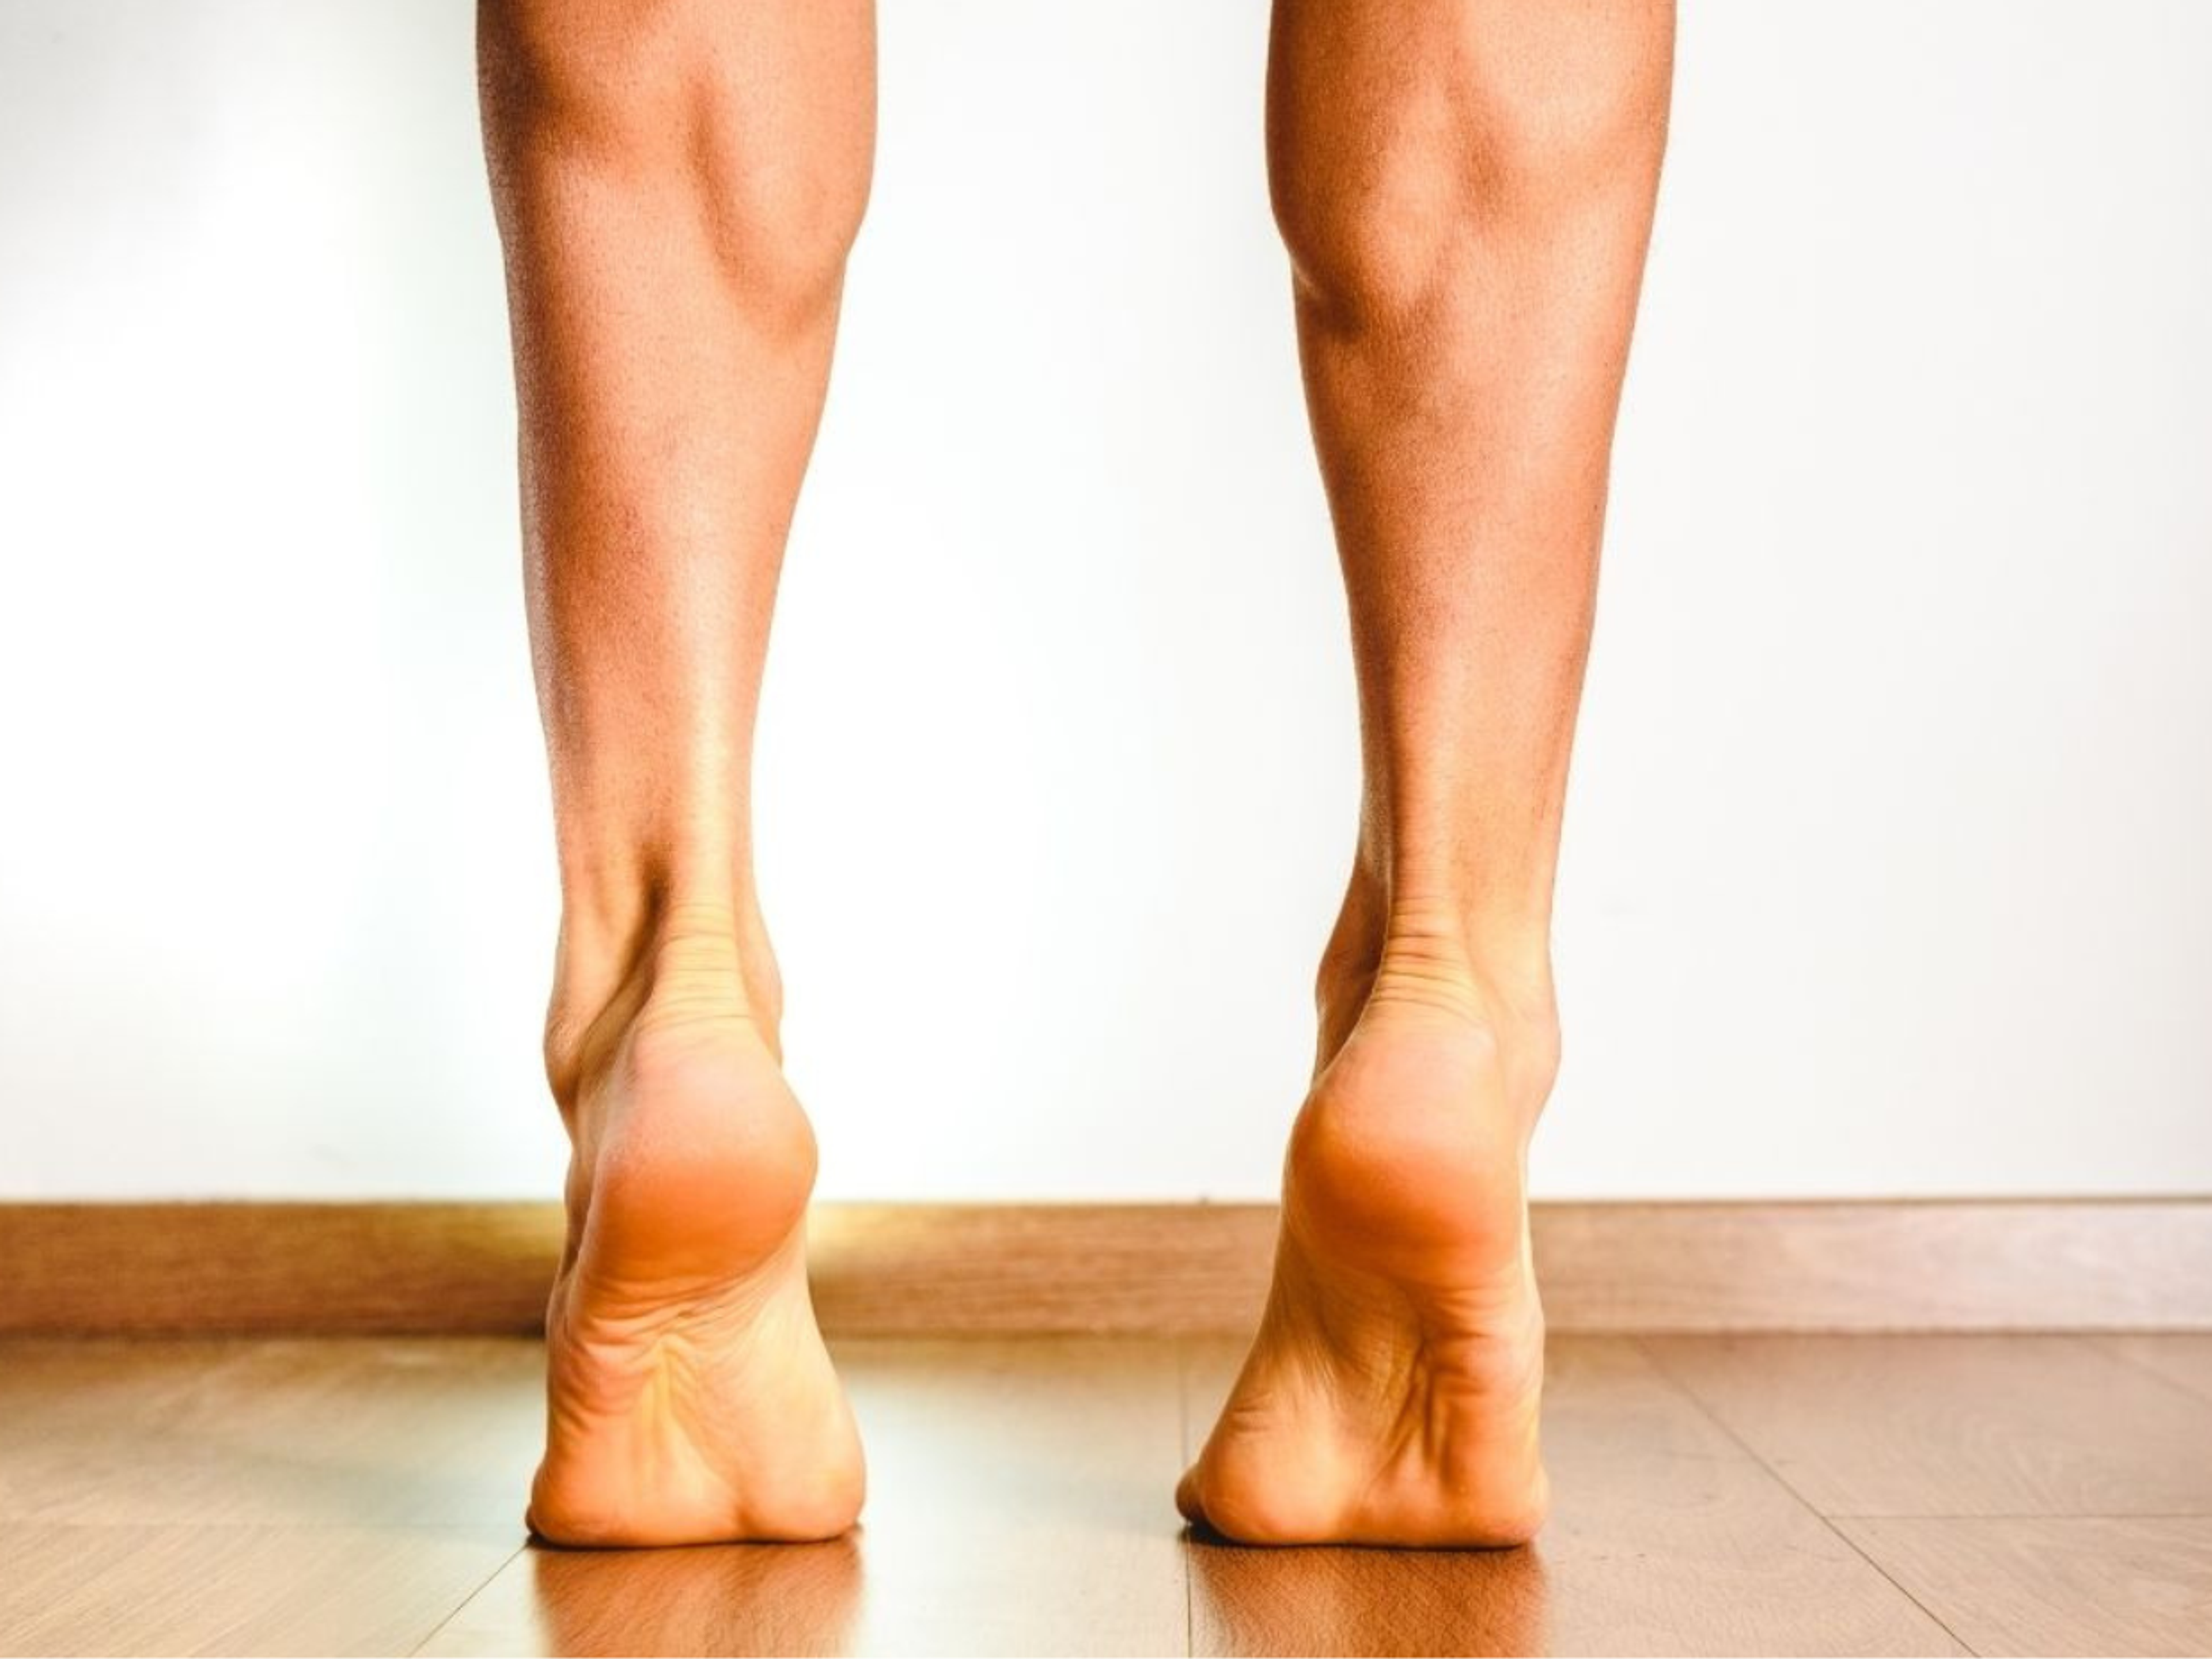 Learn why the calf raises exercise is one of the best strengthening exercises for the plantar fascia and how they help plantar fasciitis.